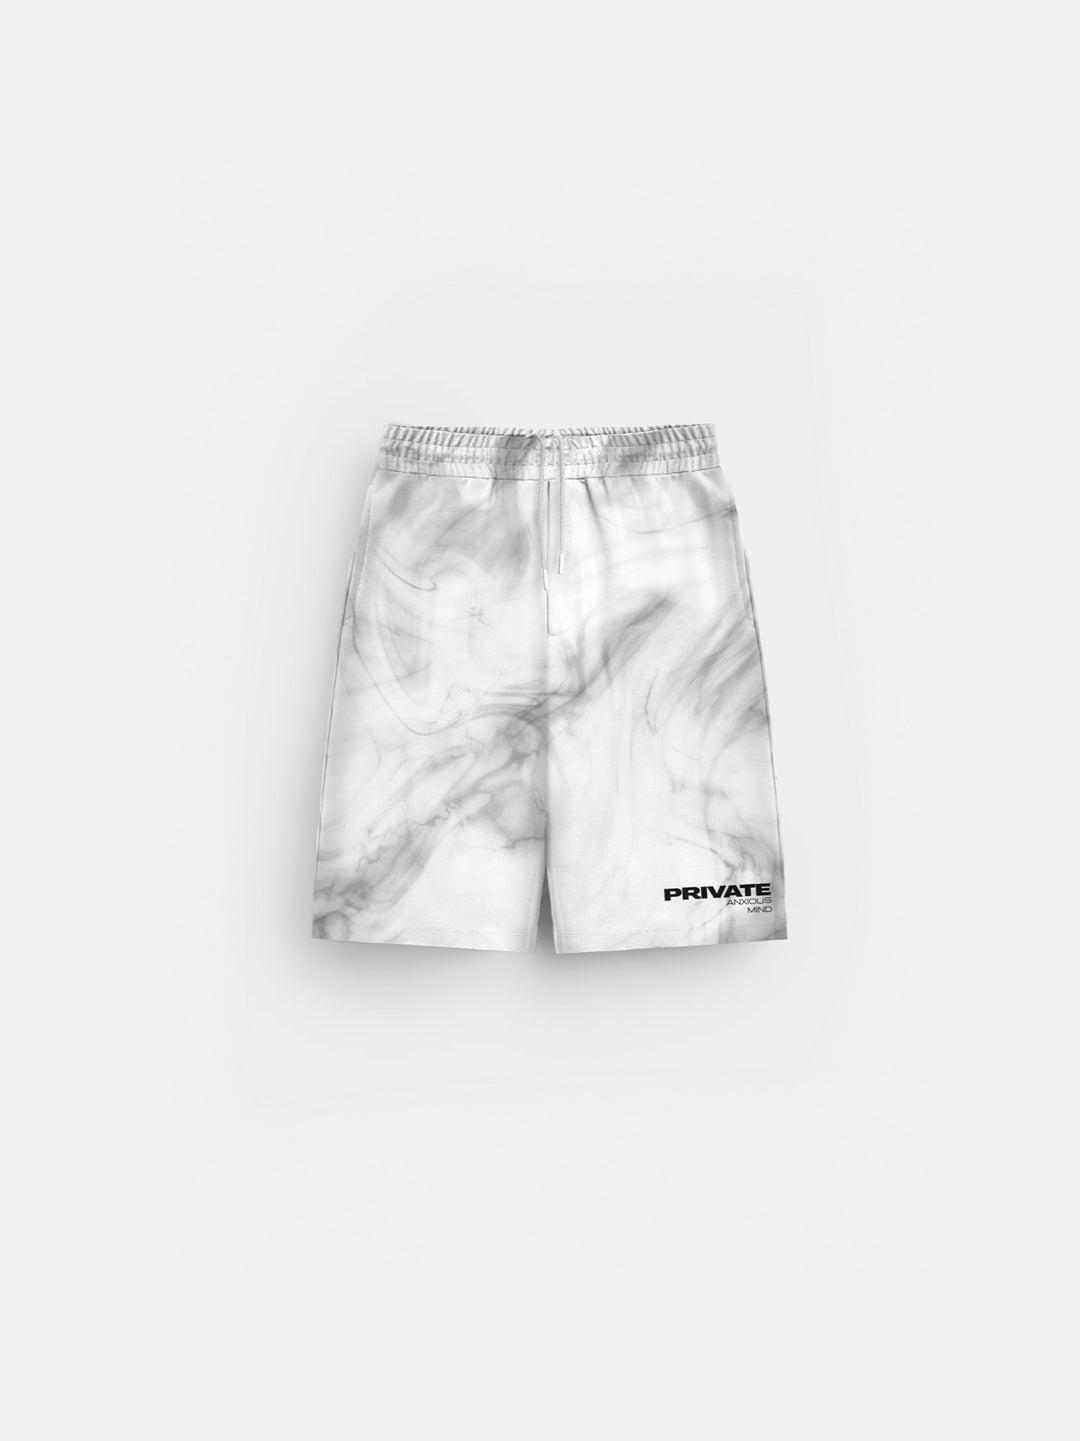 Oversize Private Smoke Shorts - White and Grey